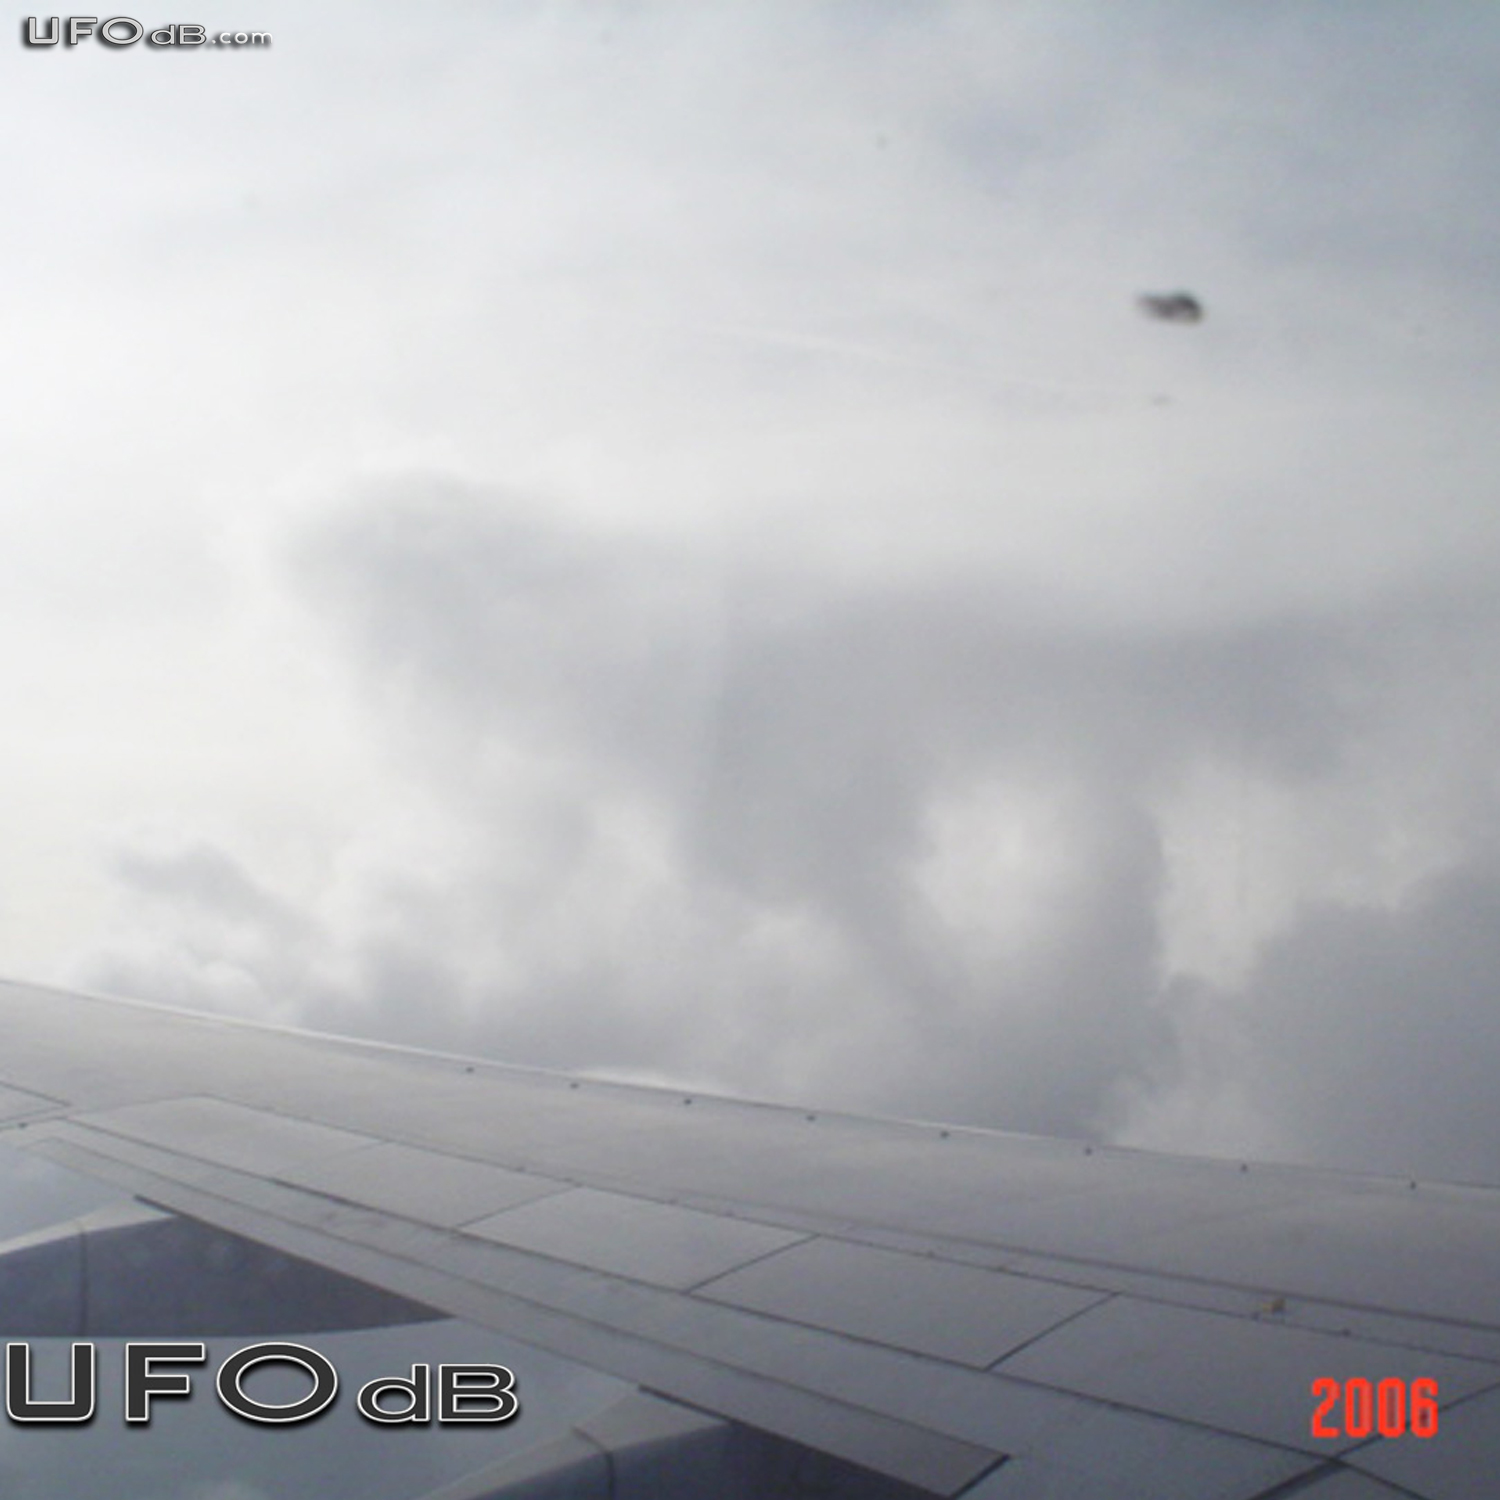 KLM Airplane passenger see UFO near wing | Amsterdam, Netherlands 2006 UFO Picture #255-2